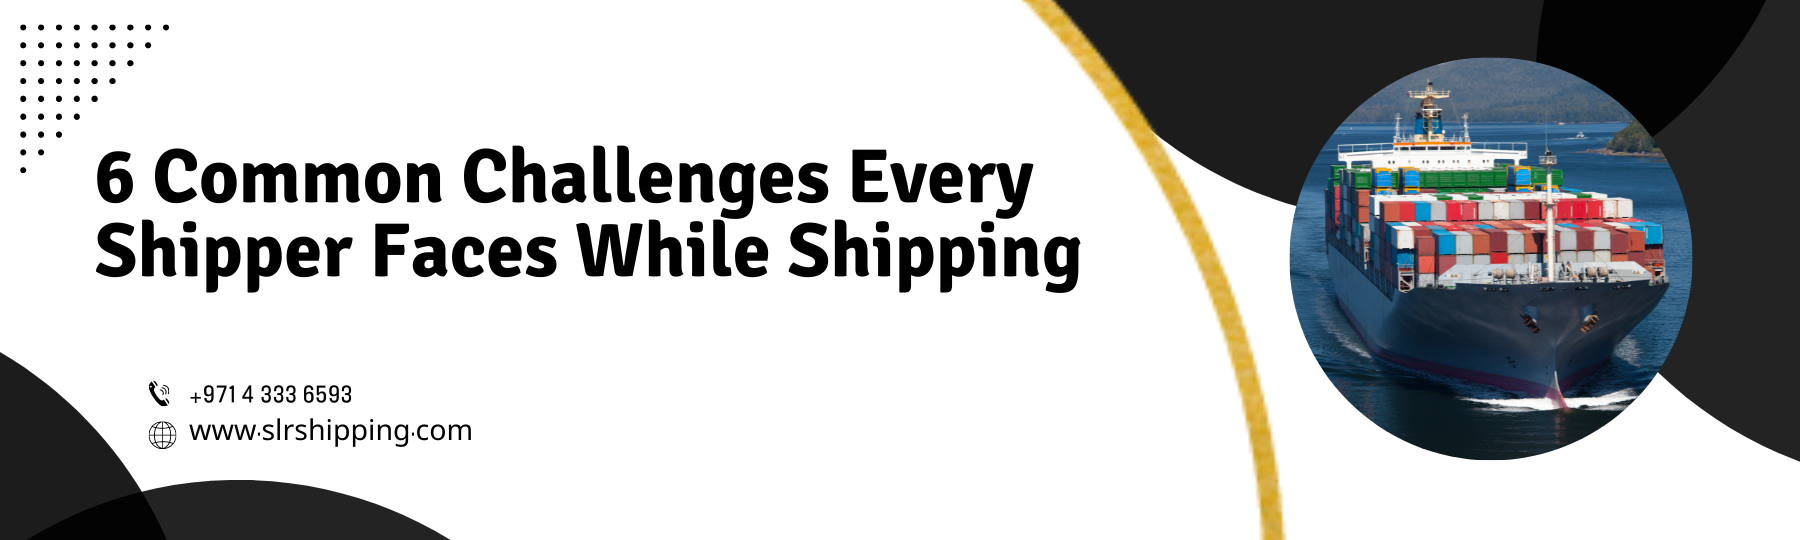 6 Common Challenges Every Shipper Faces While Shipping